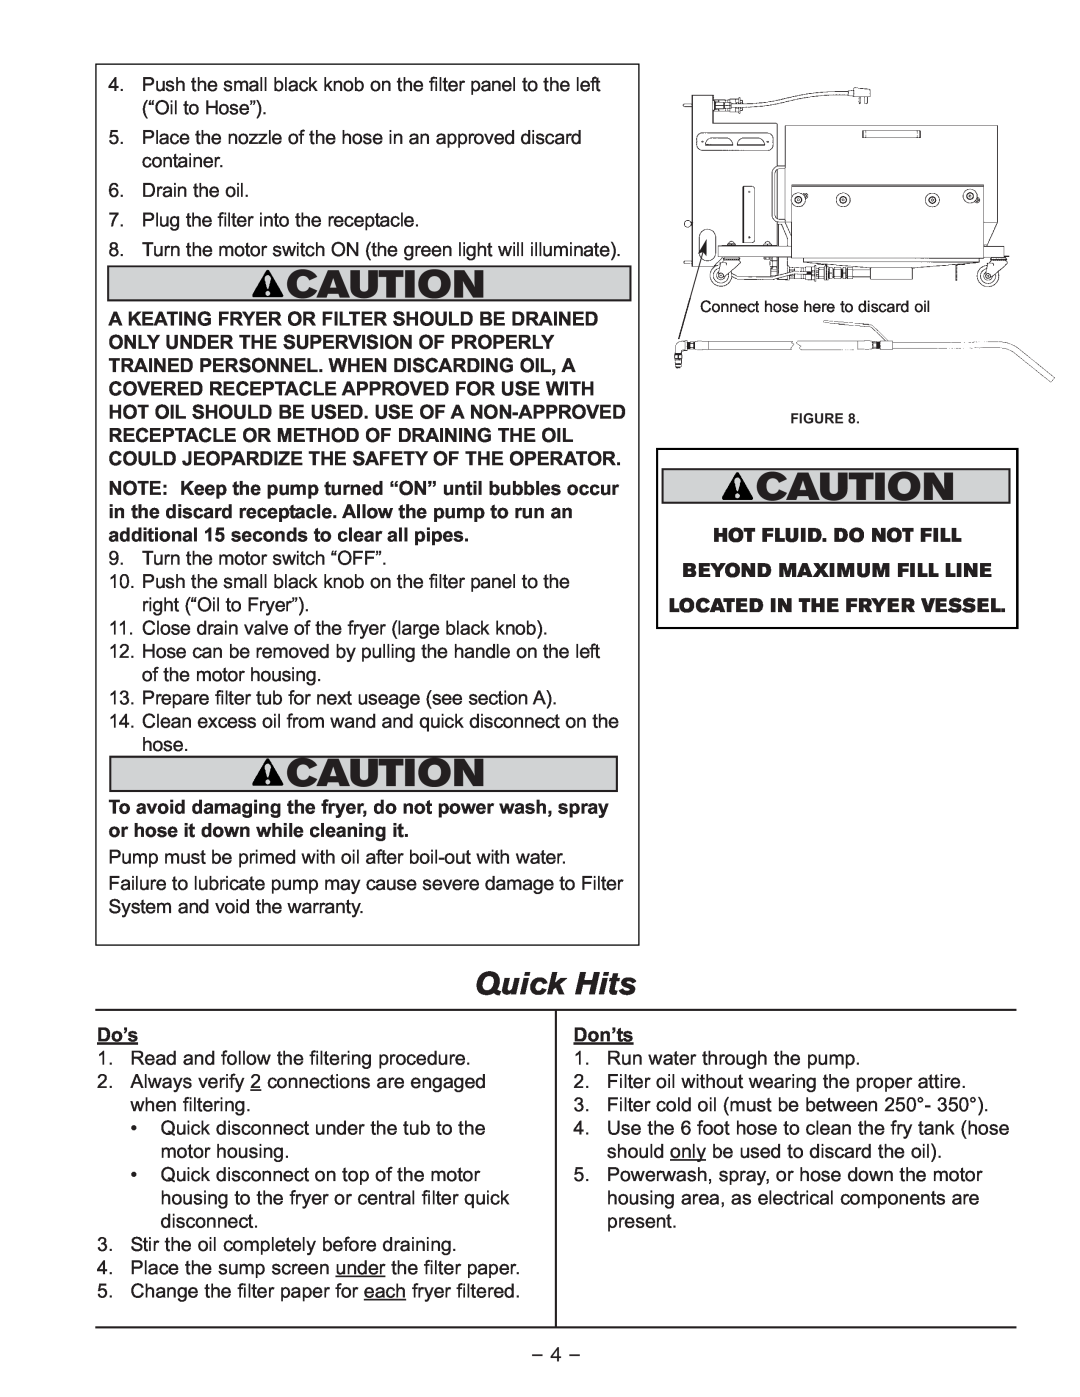 Keating Of Chicago 1-800 Quick Hits, Hot Fluid. Do Not Fill Beyond Maximum Fill Line, Located In The Fryer Vessel, Do’s 